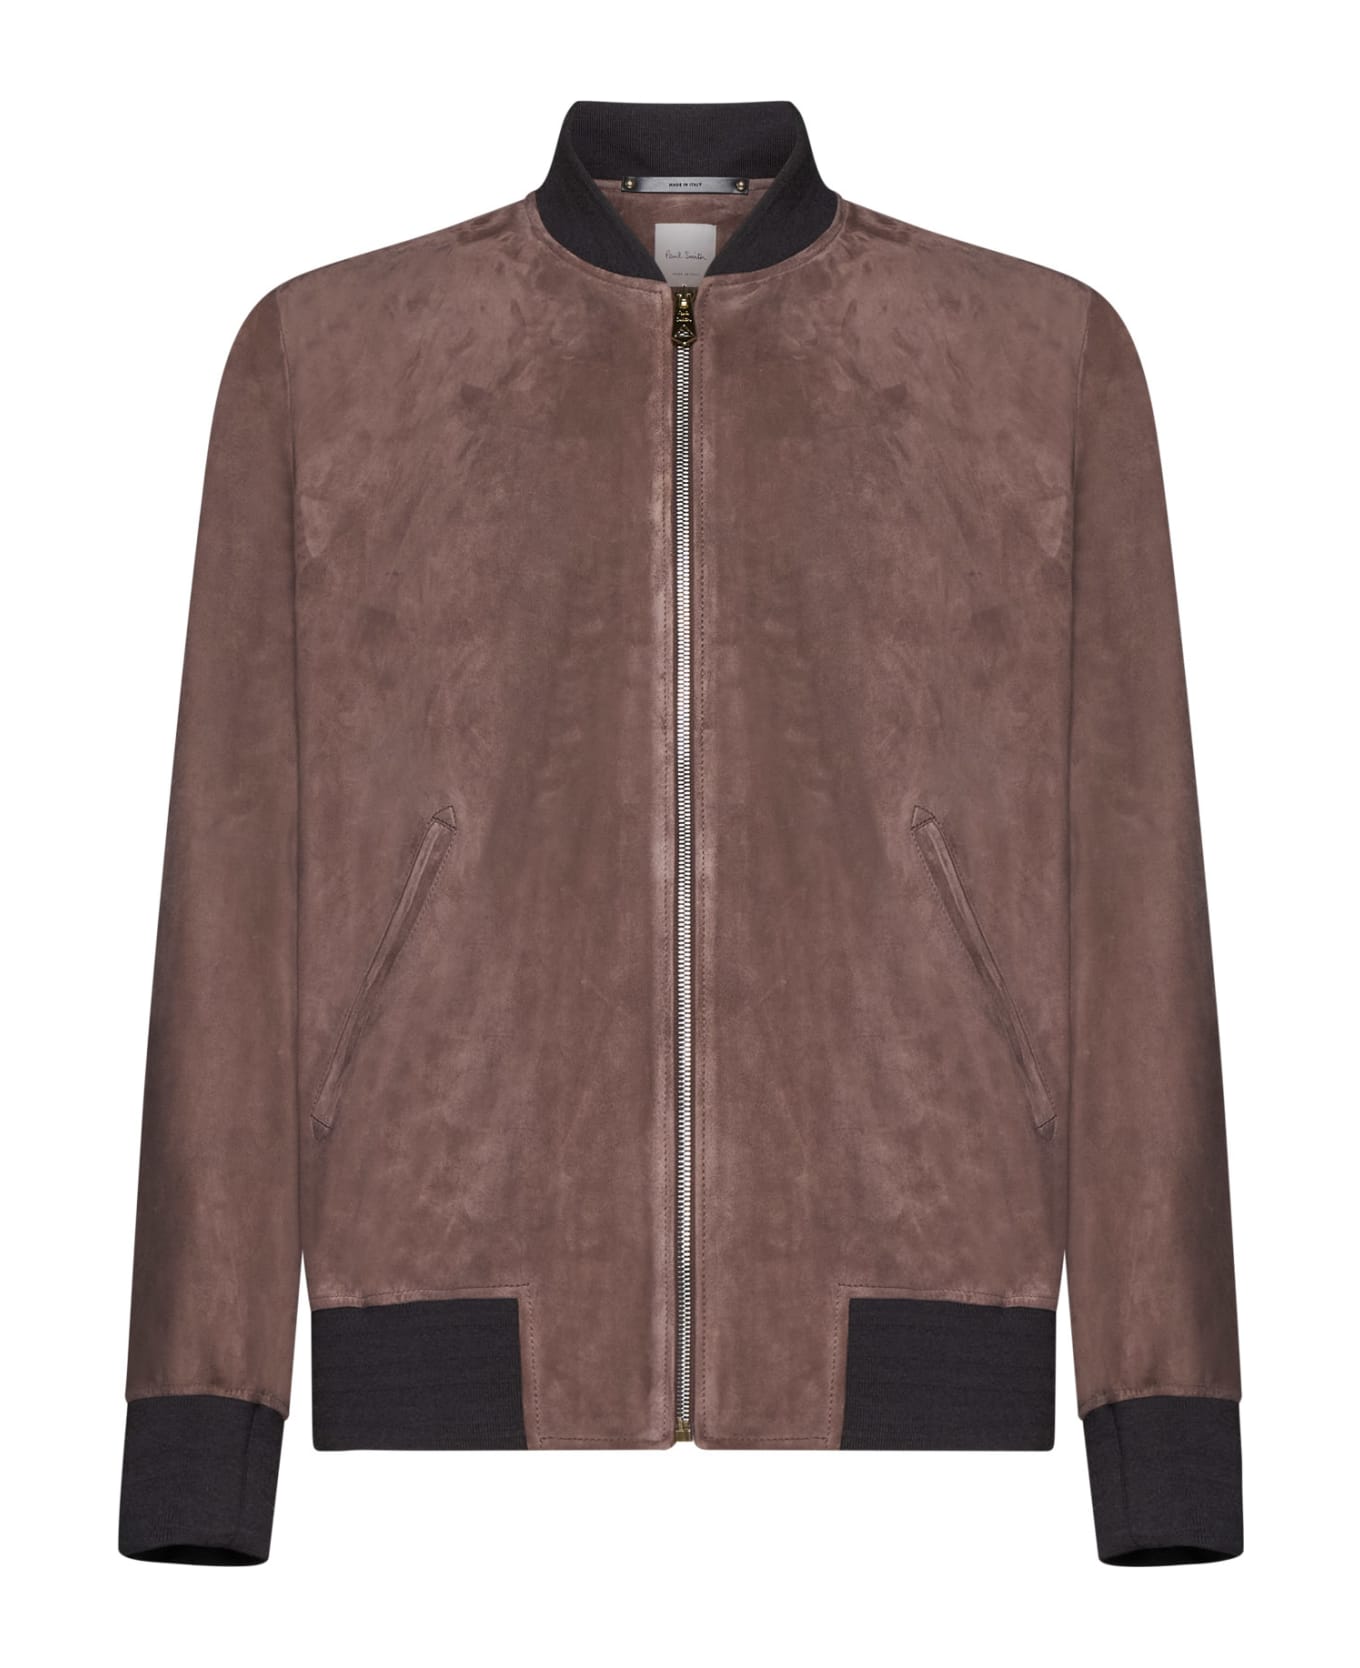 Paul Smith Suede Bomber Jacket - Brown ジャケット